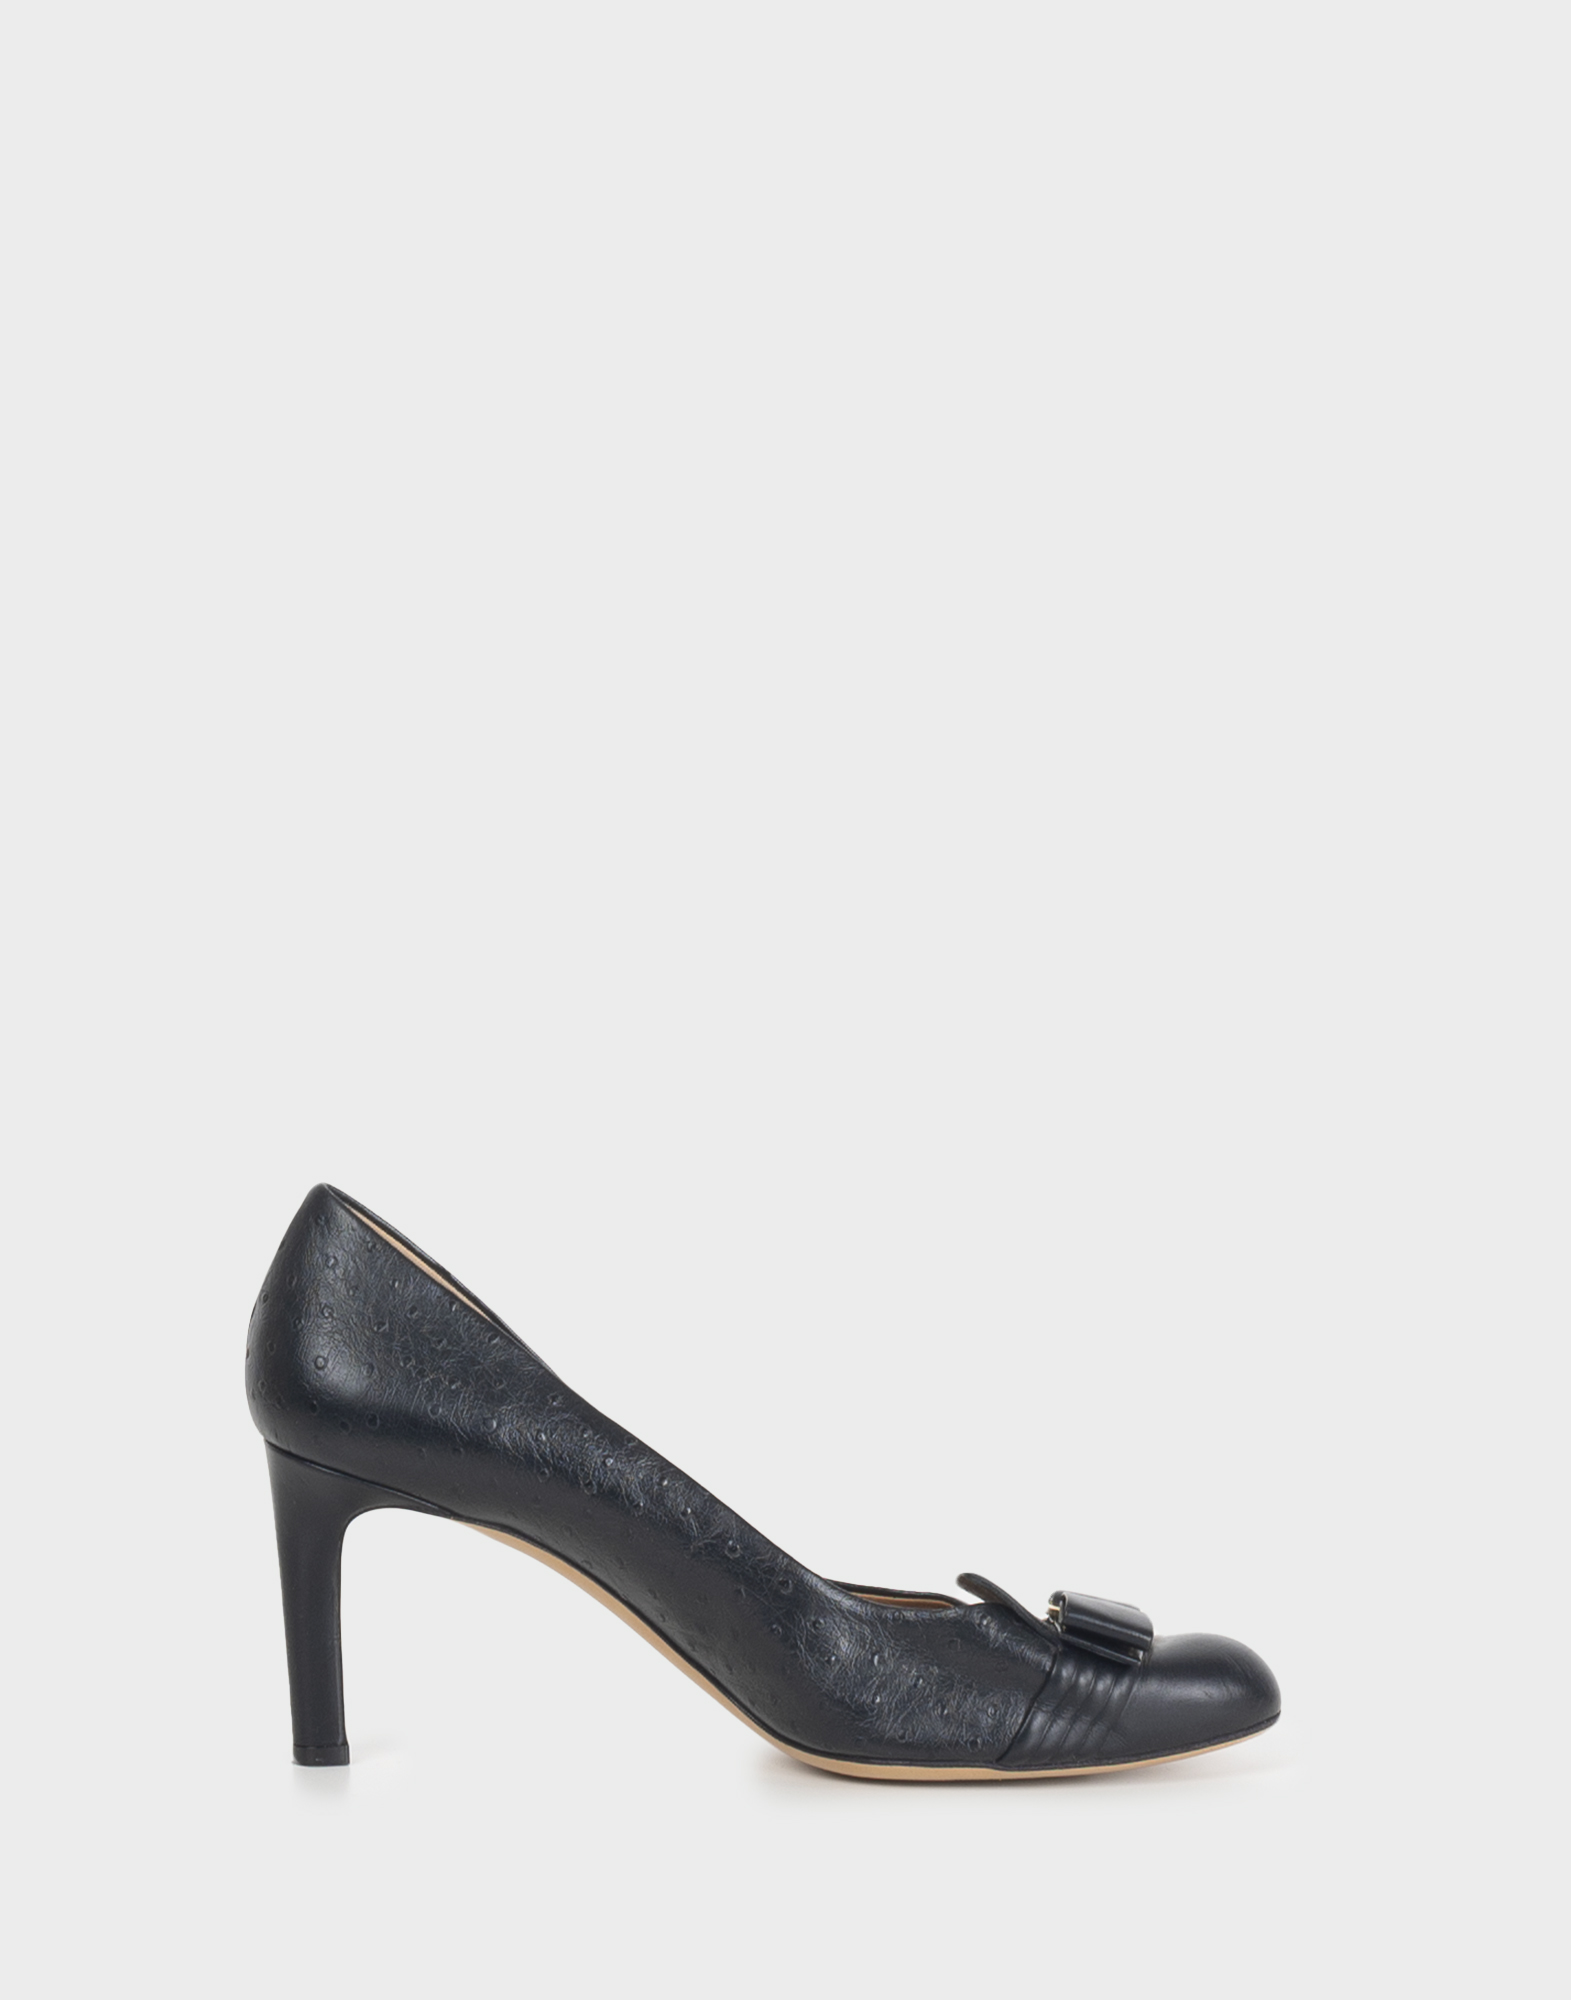 Women's black leather pumps with thin heels, round toe, and applied bow